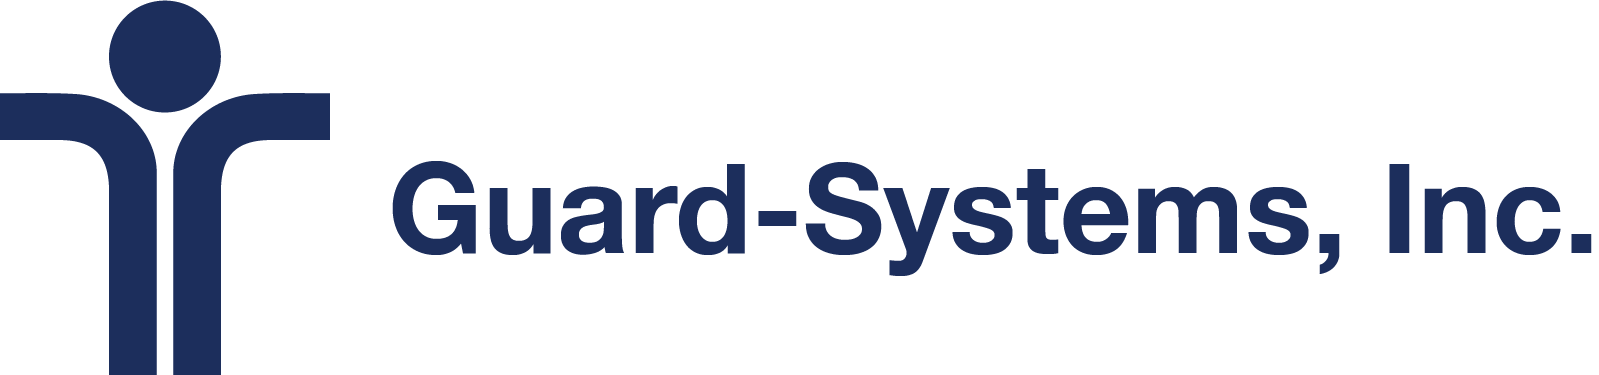 Guard Systems Inc Logo.png